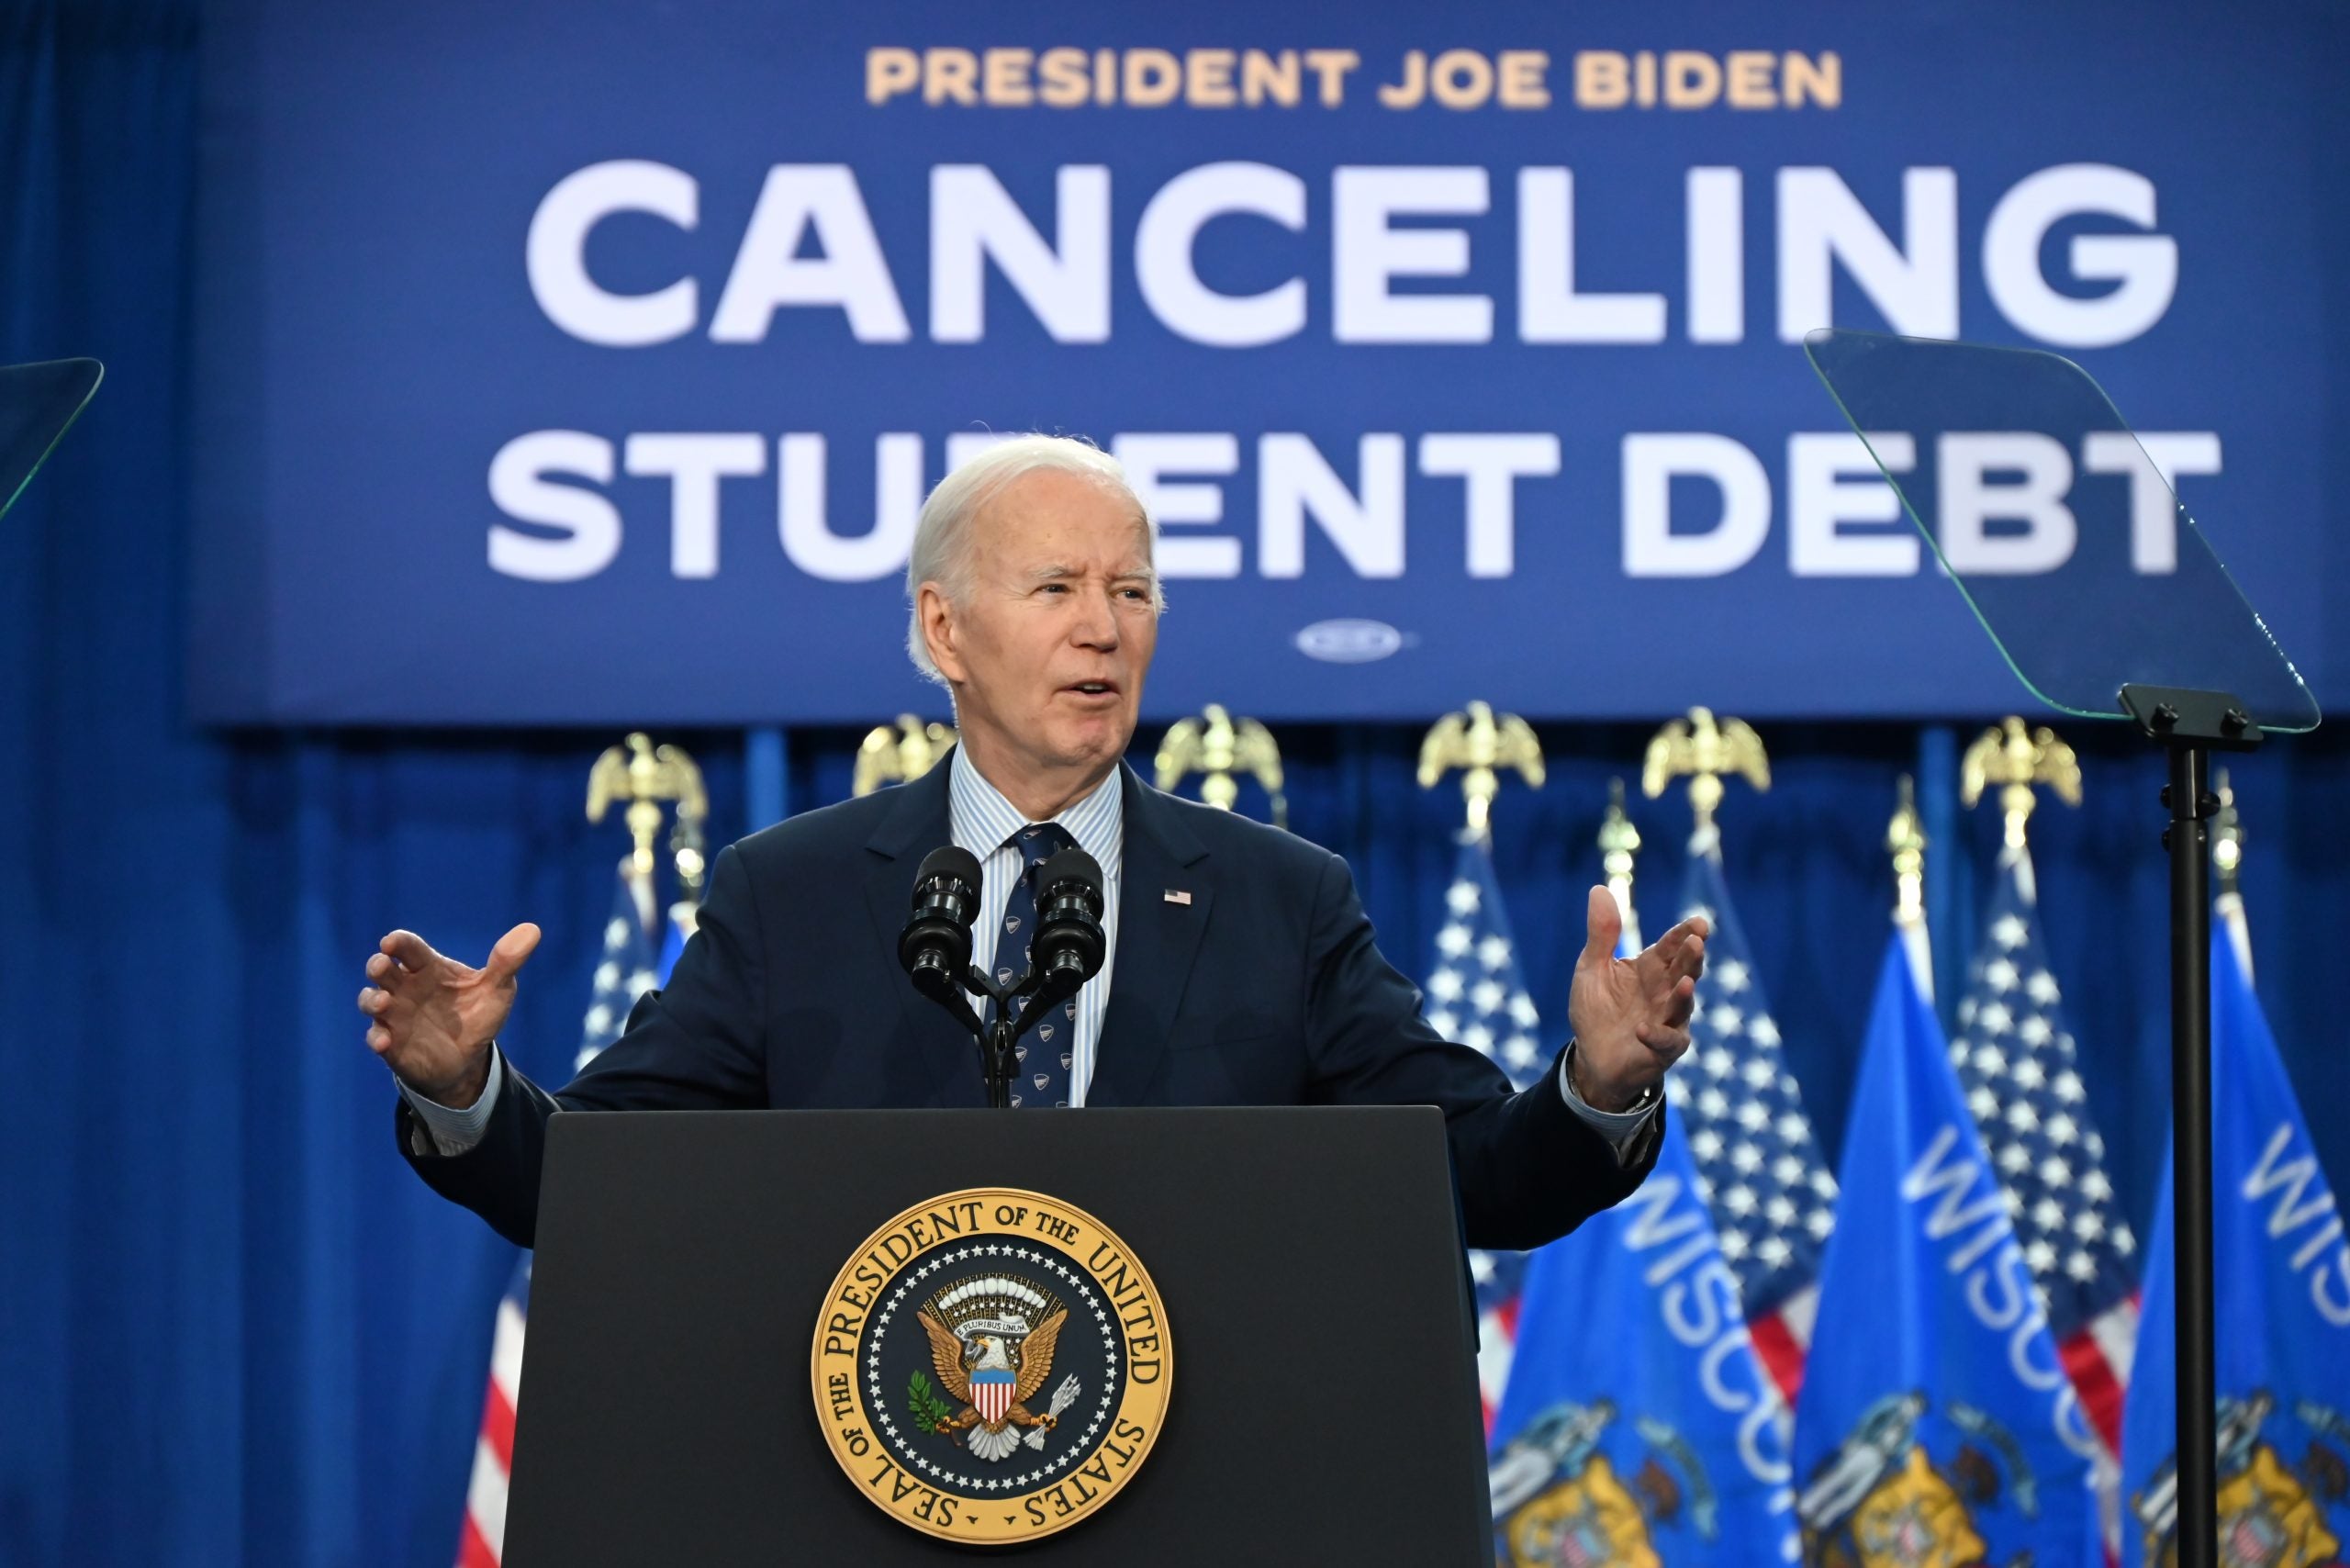 New Student Loan Forgiveness From Biden Could Help Millions Of People. Here's What You Need To Know